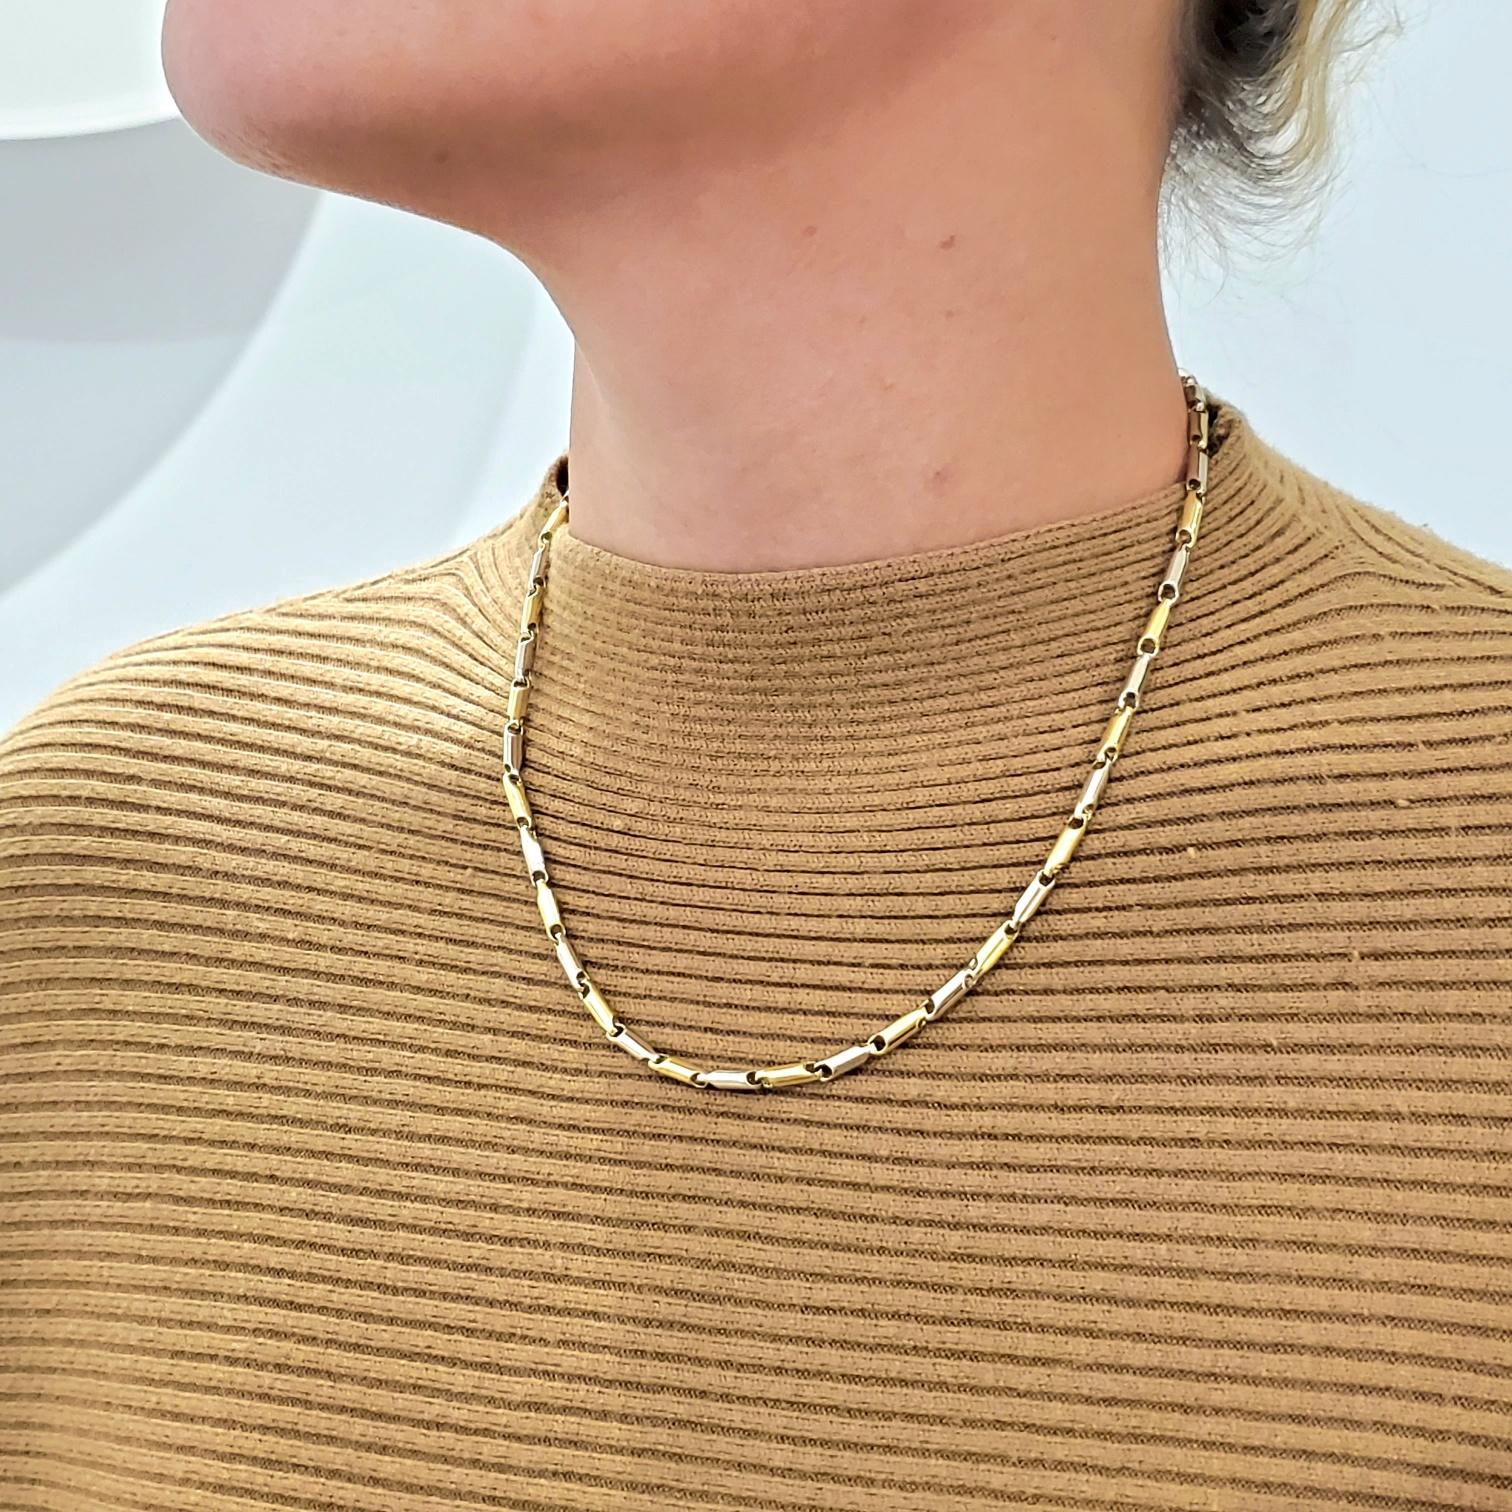 An Italian bicolor chain necklace.

An unusual contemporary bicolor chain, crafted in Vicenza Italy in solid yellow and white gold of 18 karats. The design is composed bt 45 tubular elements alternating in white and yellow and fitted with a fancy